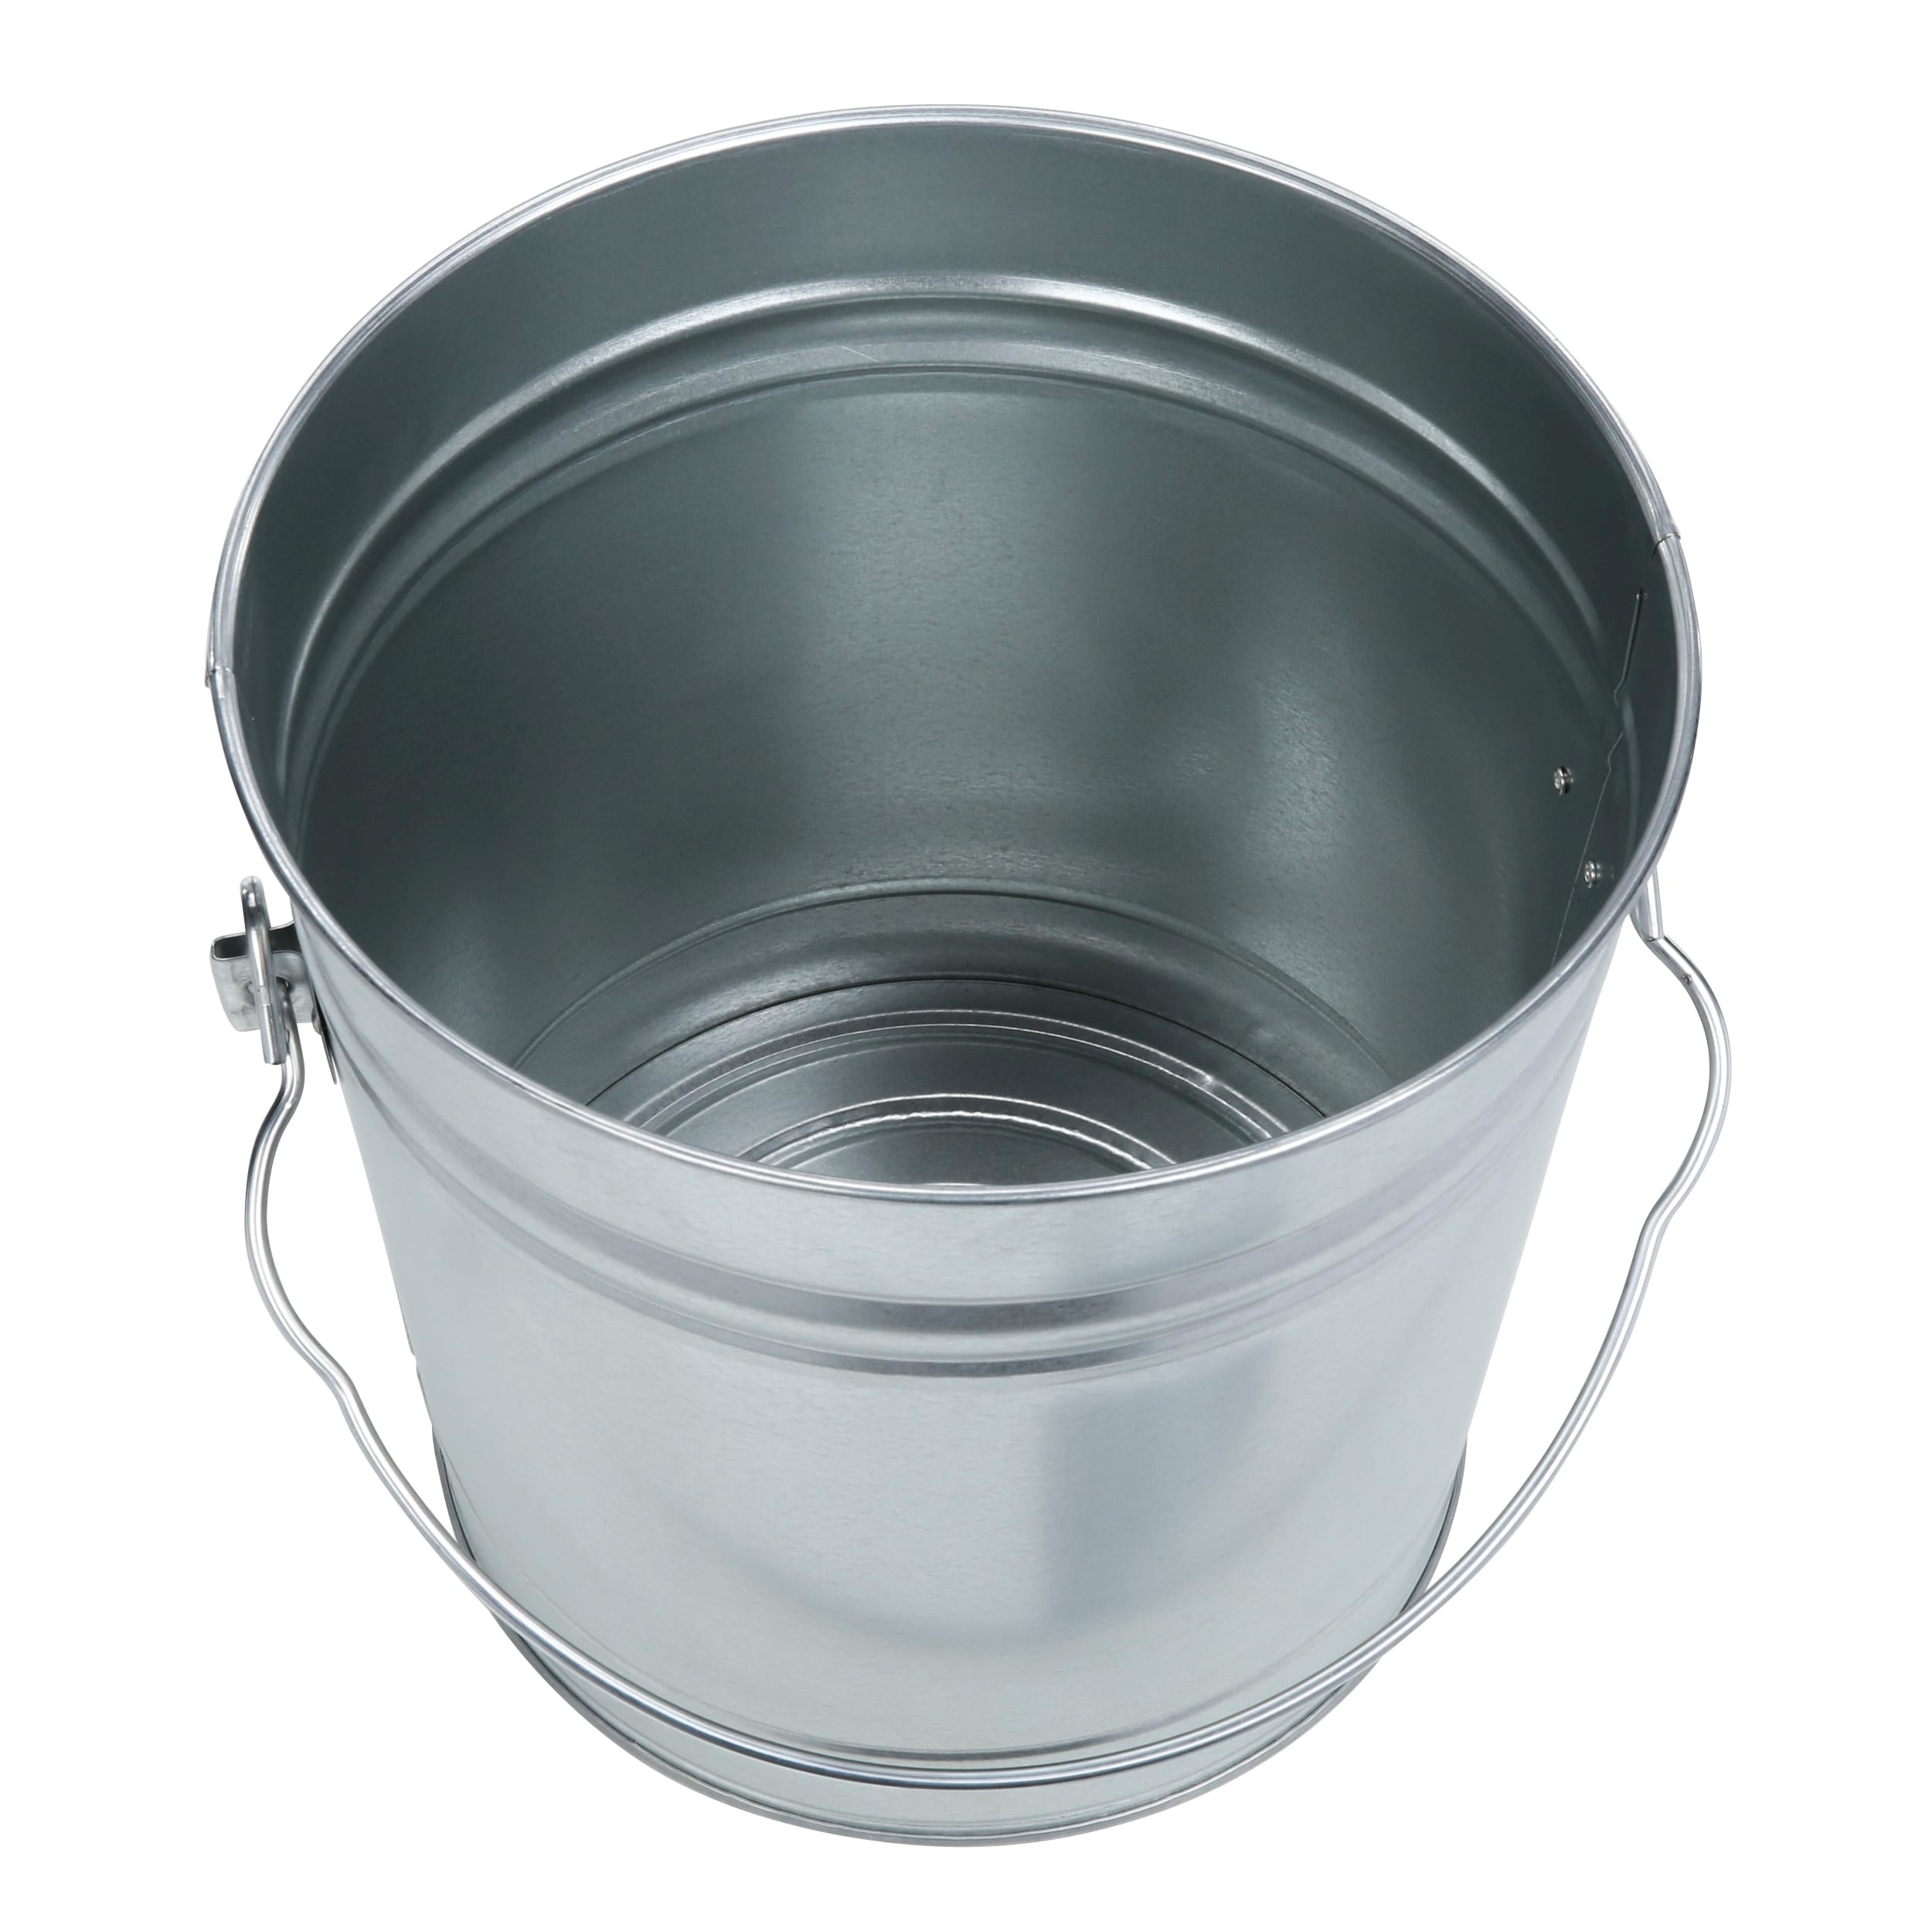  KCHEX Trash can with lid - Pre-Galvanized Trash Can